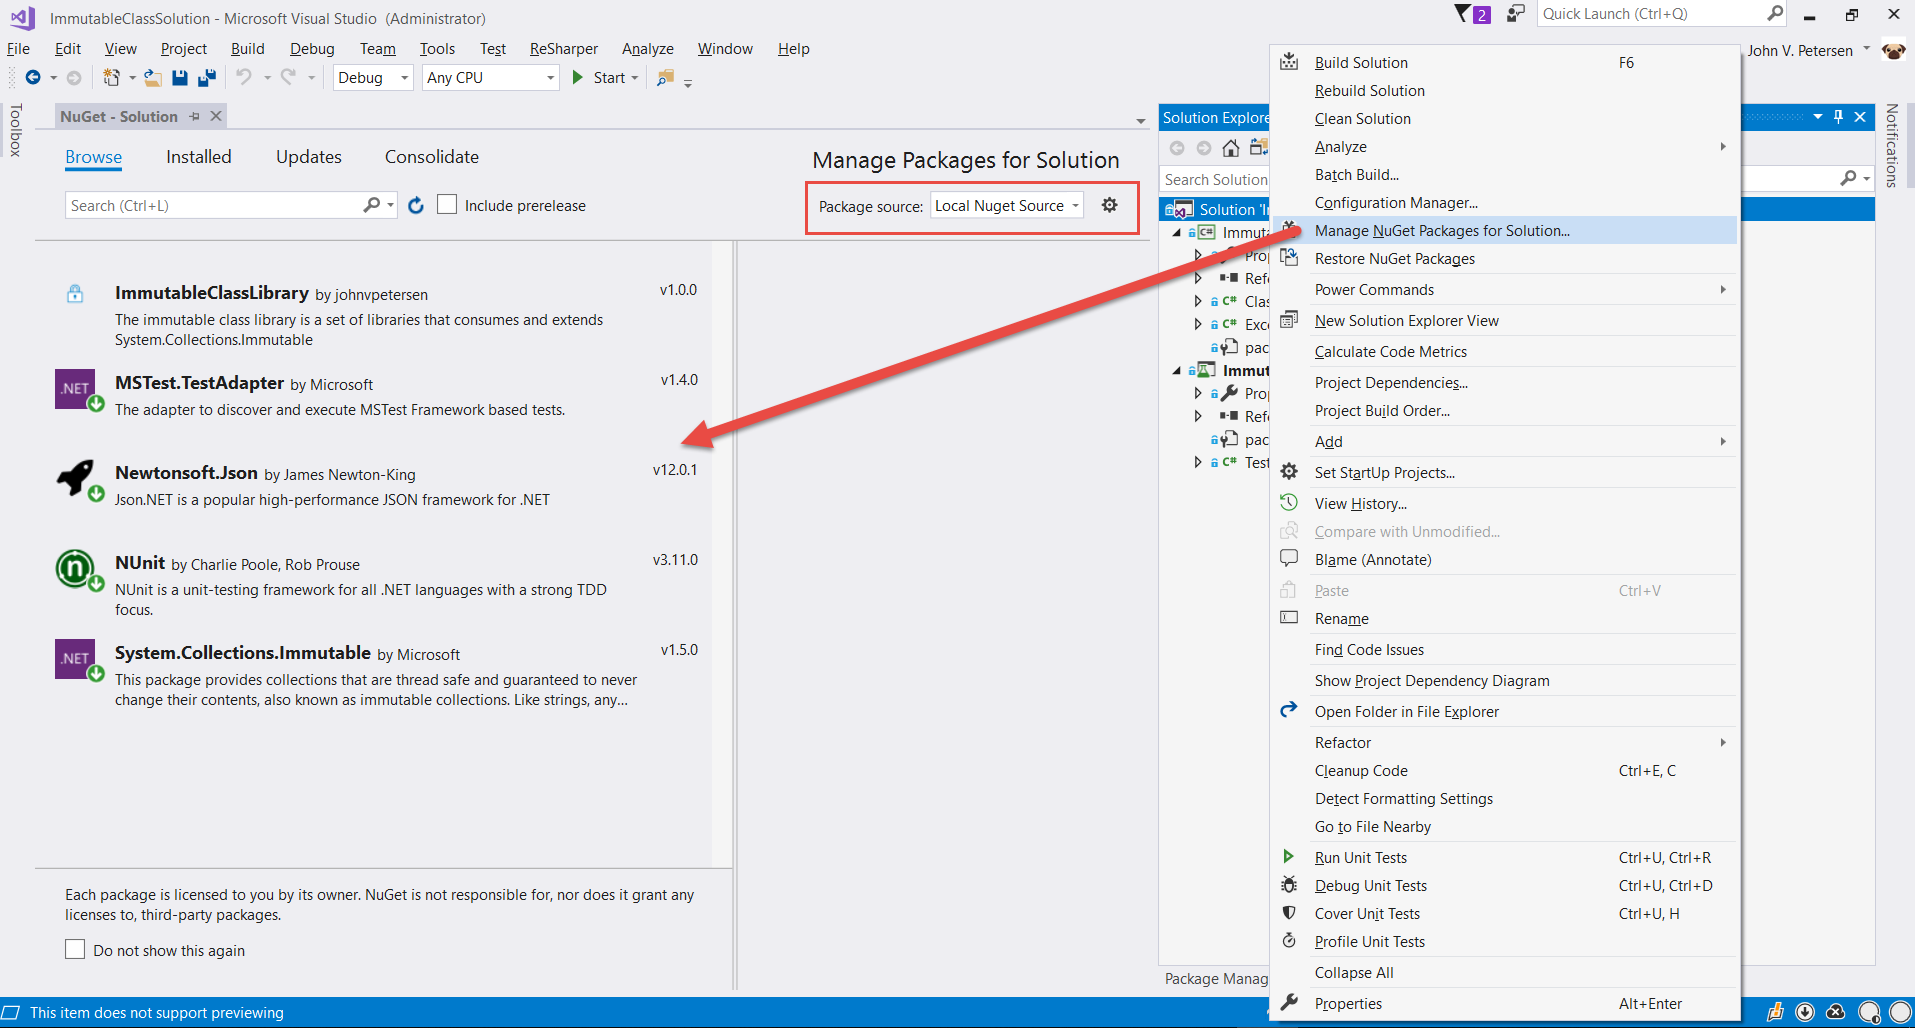 Figure 1: One way of accessing the NuGet Package Manager is via the project or solution context menu.